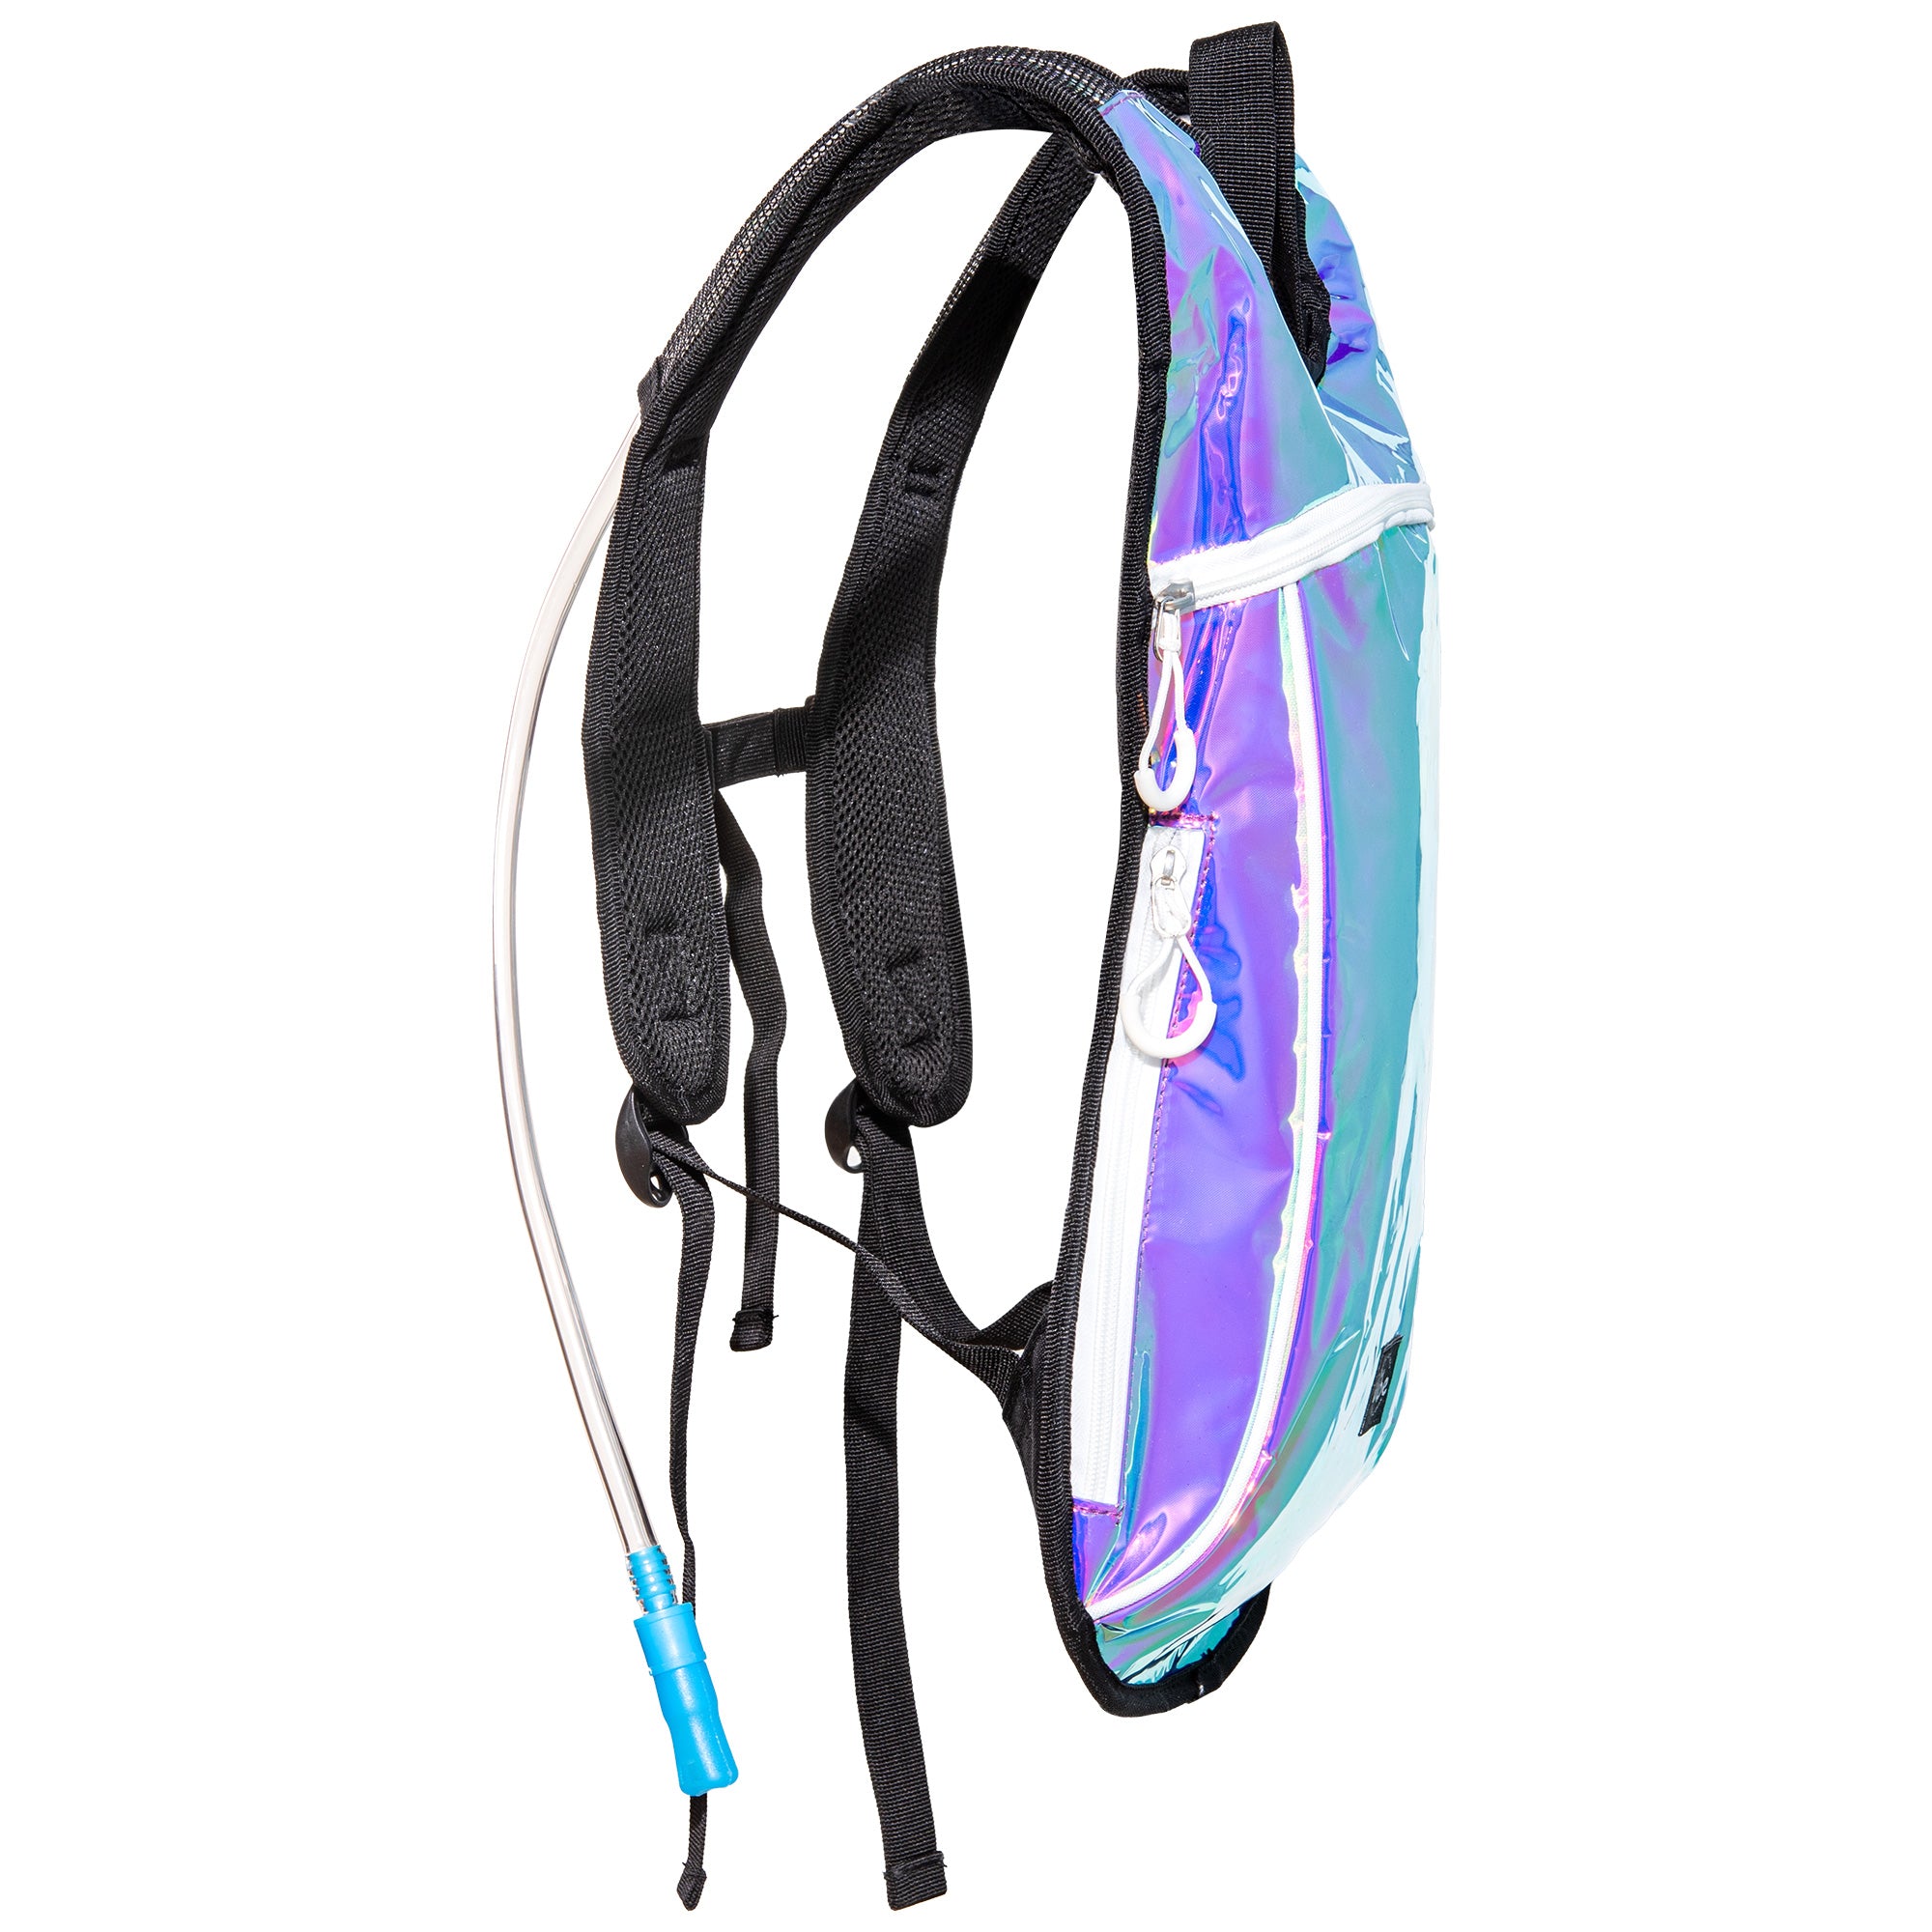 Hydration Backpack - Purple Iridescent Holographic